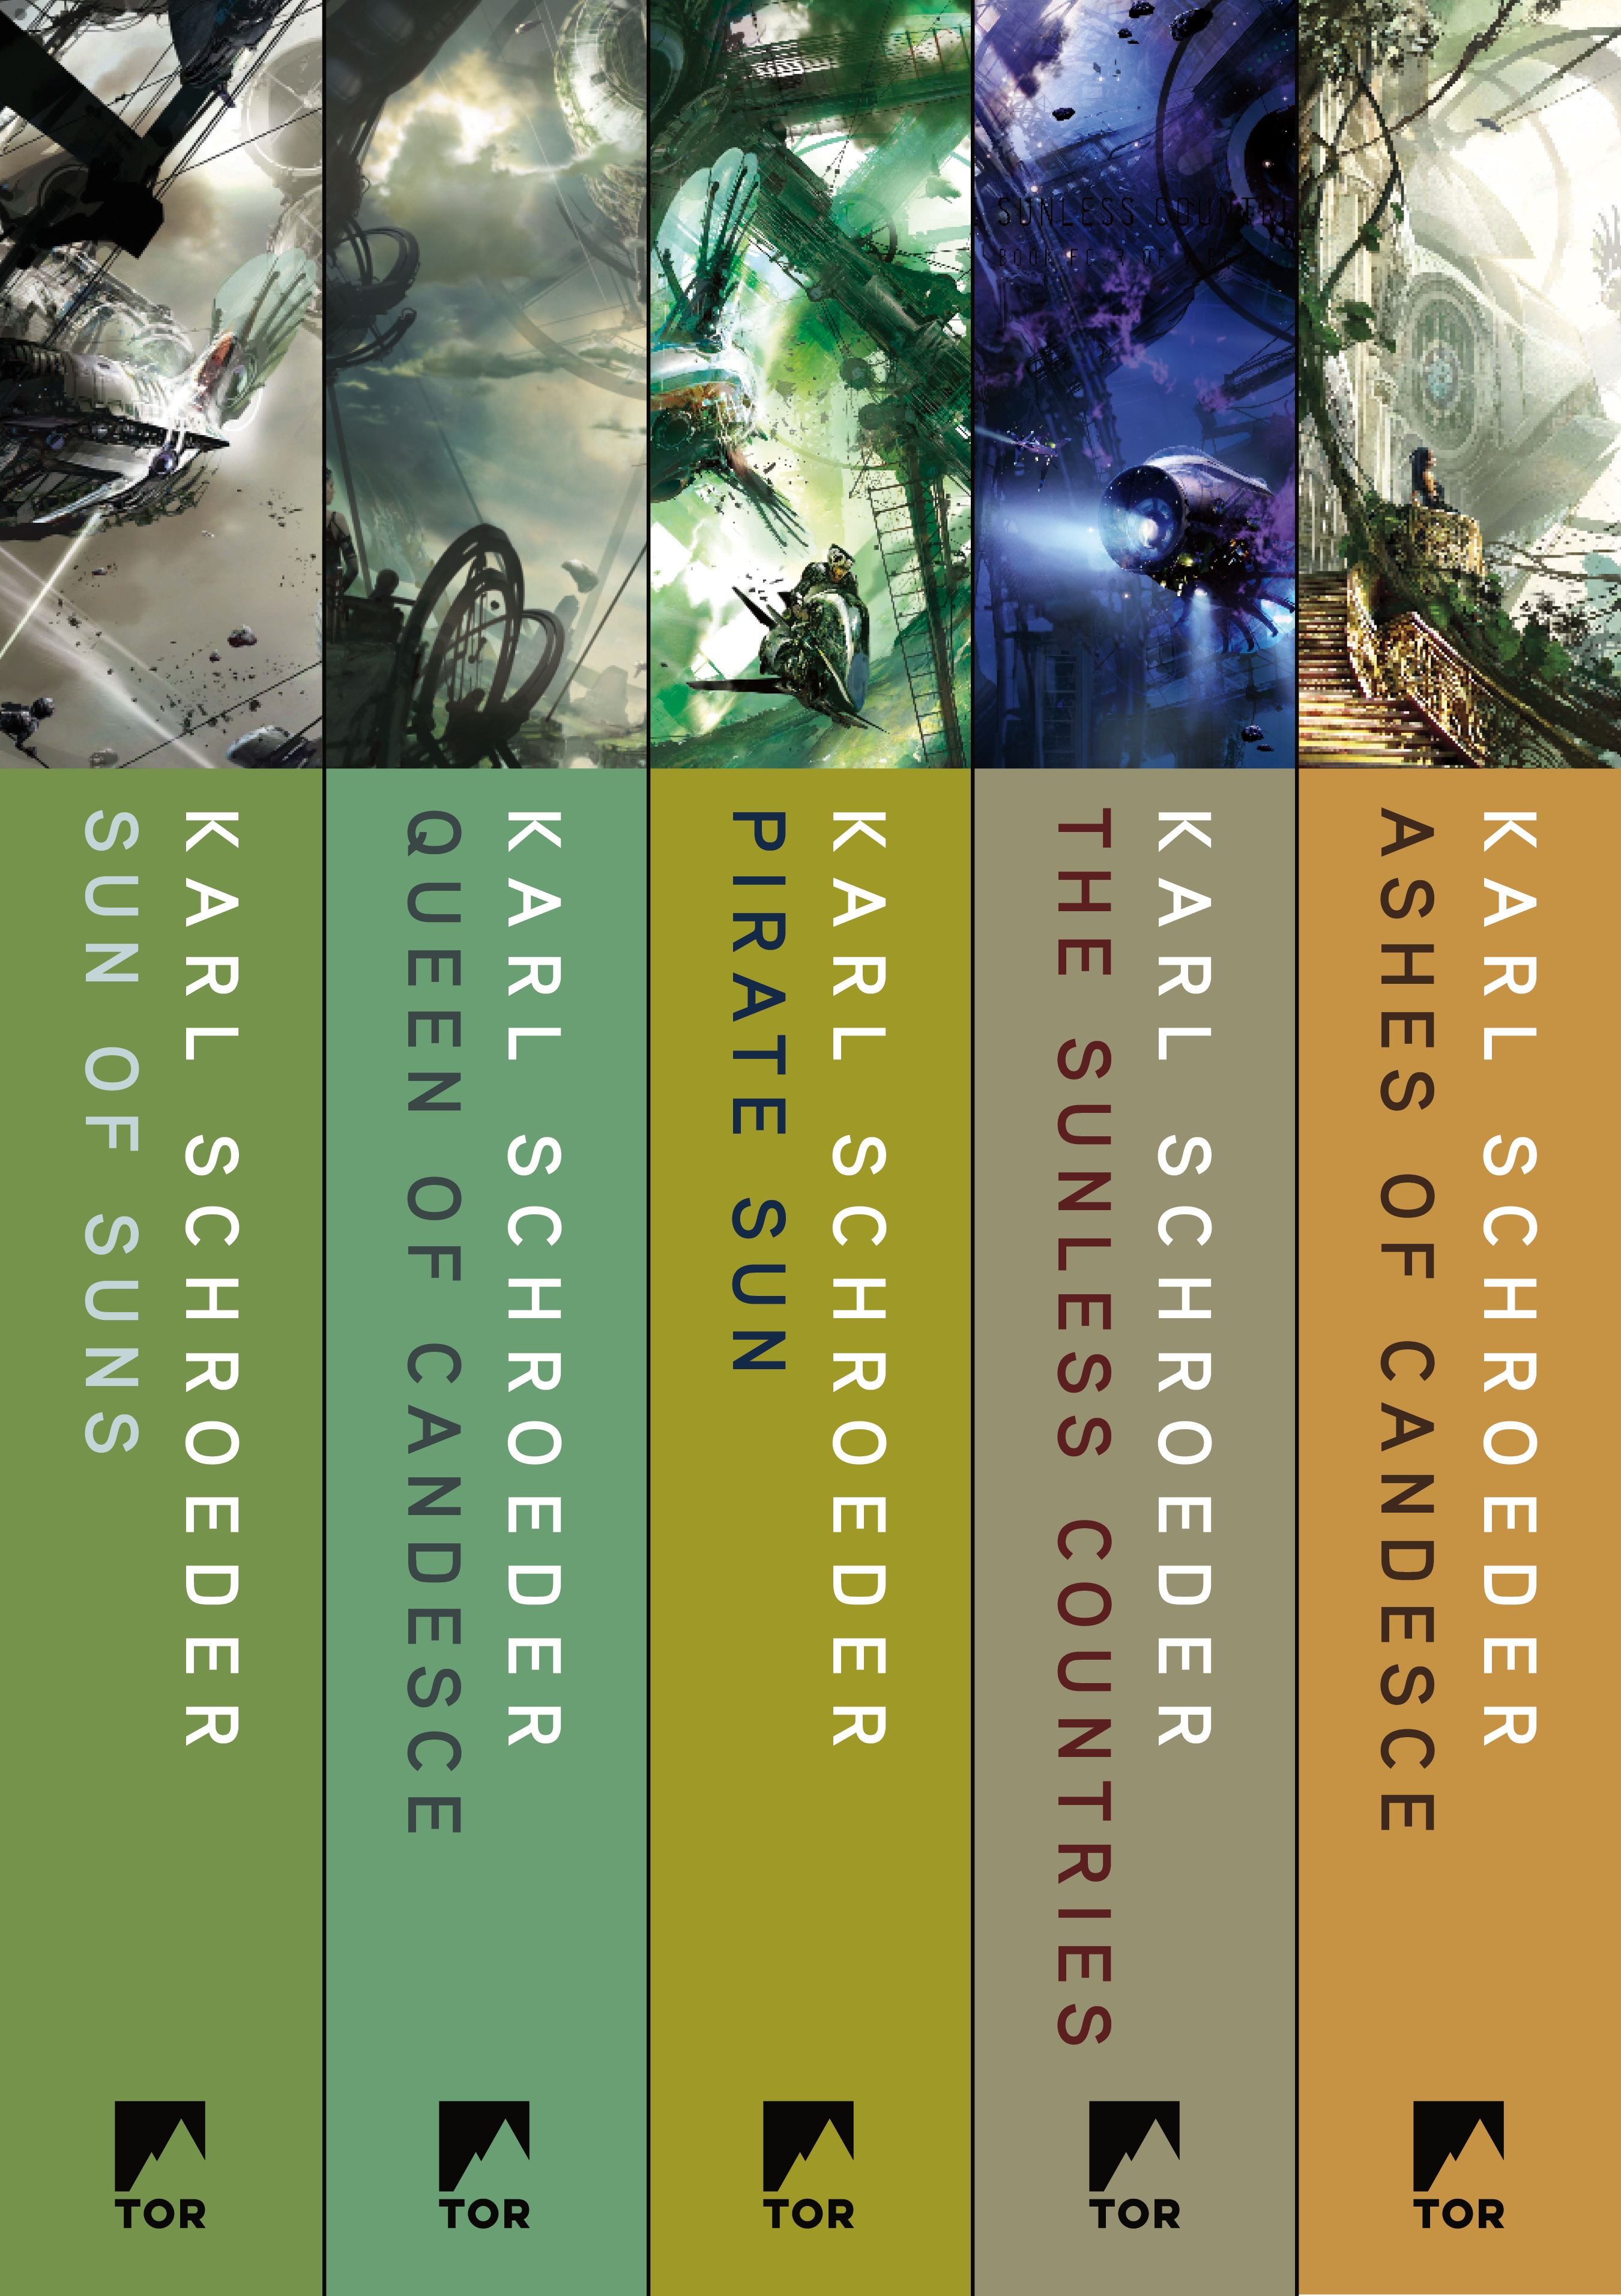 The Complete Virga Series : Sun of Suns, Queen of Candesce,  Pirate Sun, Sunless Countries, Ashes of Candesce by Karl Schroeder